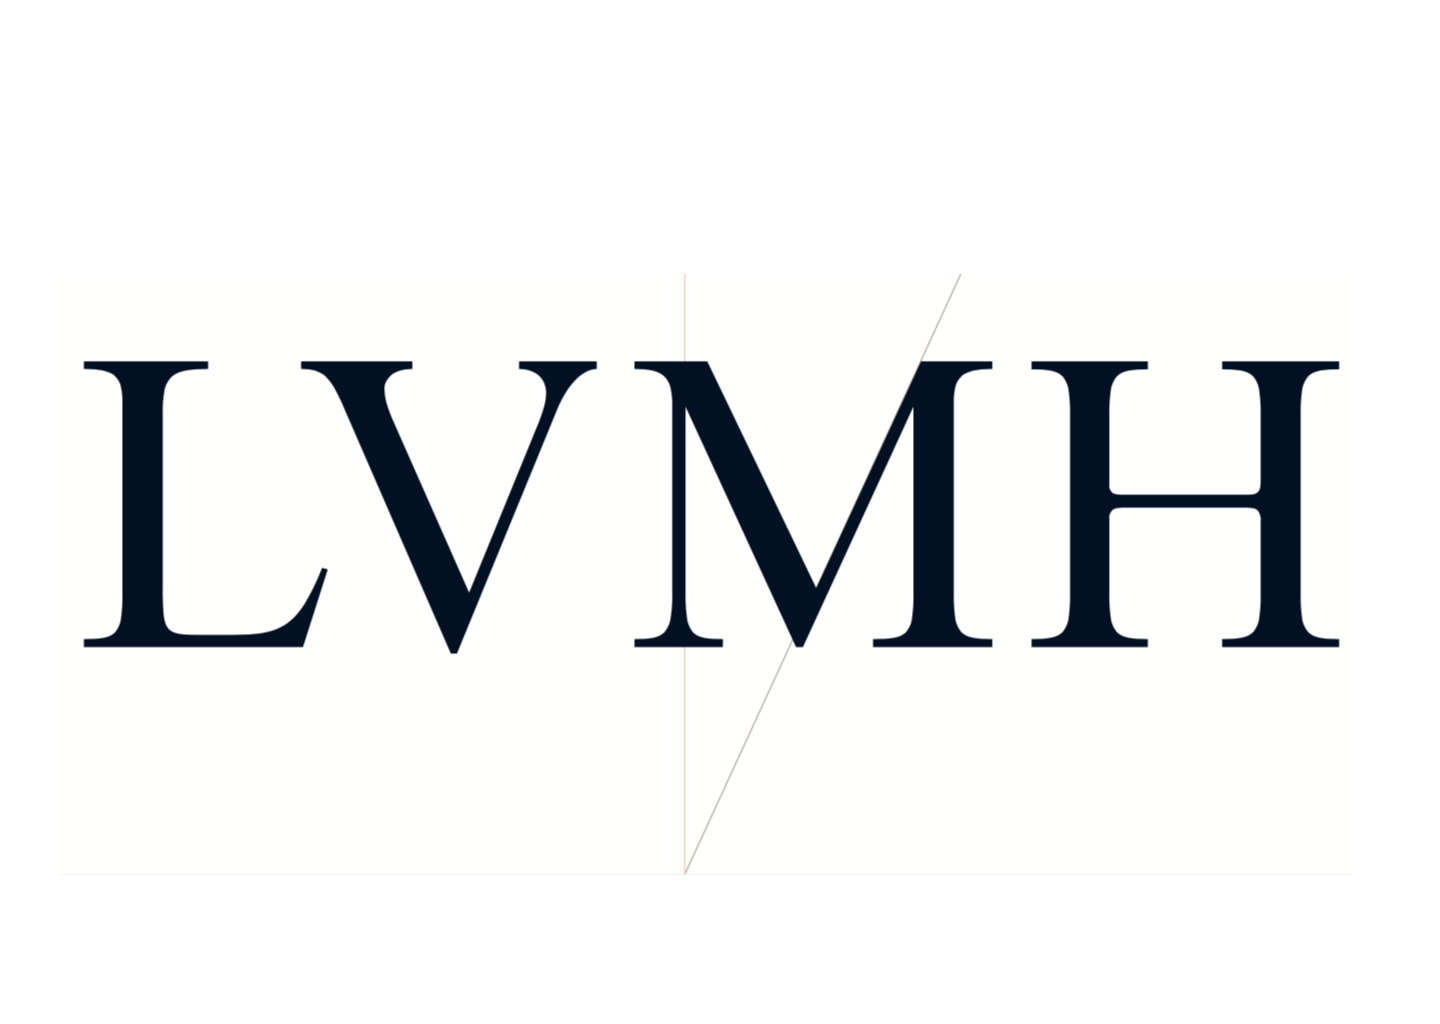 So LVMH's stance on politics is “neutral,” but they're still making a $705  logo-emblazoned keffiyeh, which is a traditional Arab headdress…